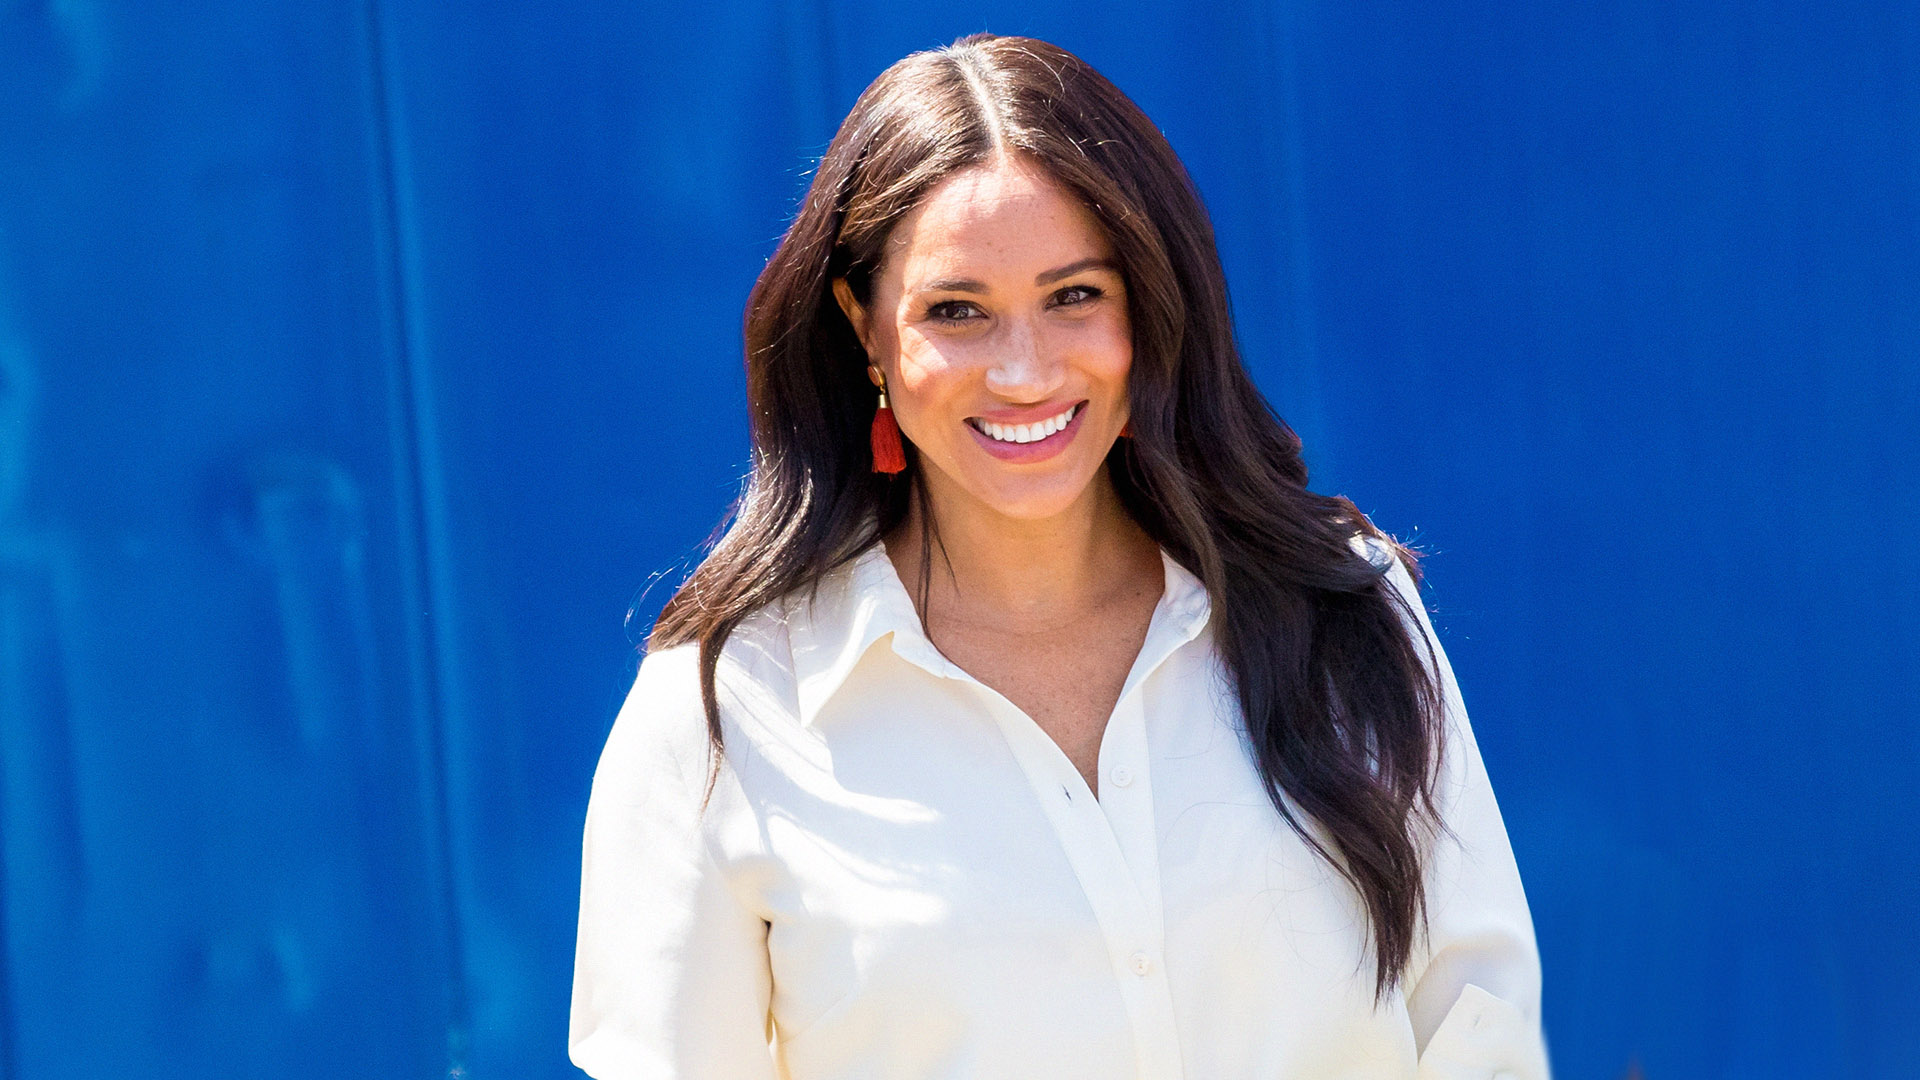 Here's Why Meghan Markle Podcast Turned Out to Be a Disaster